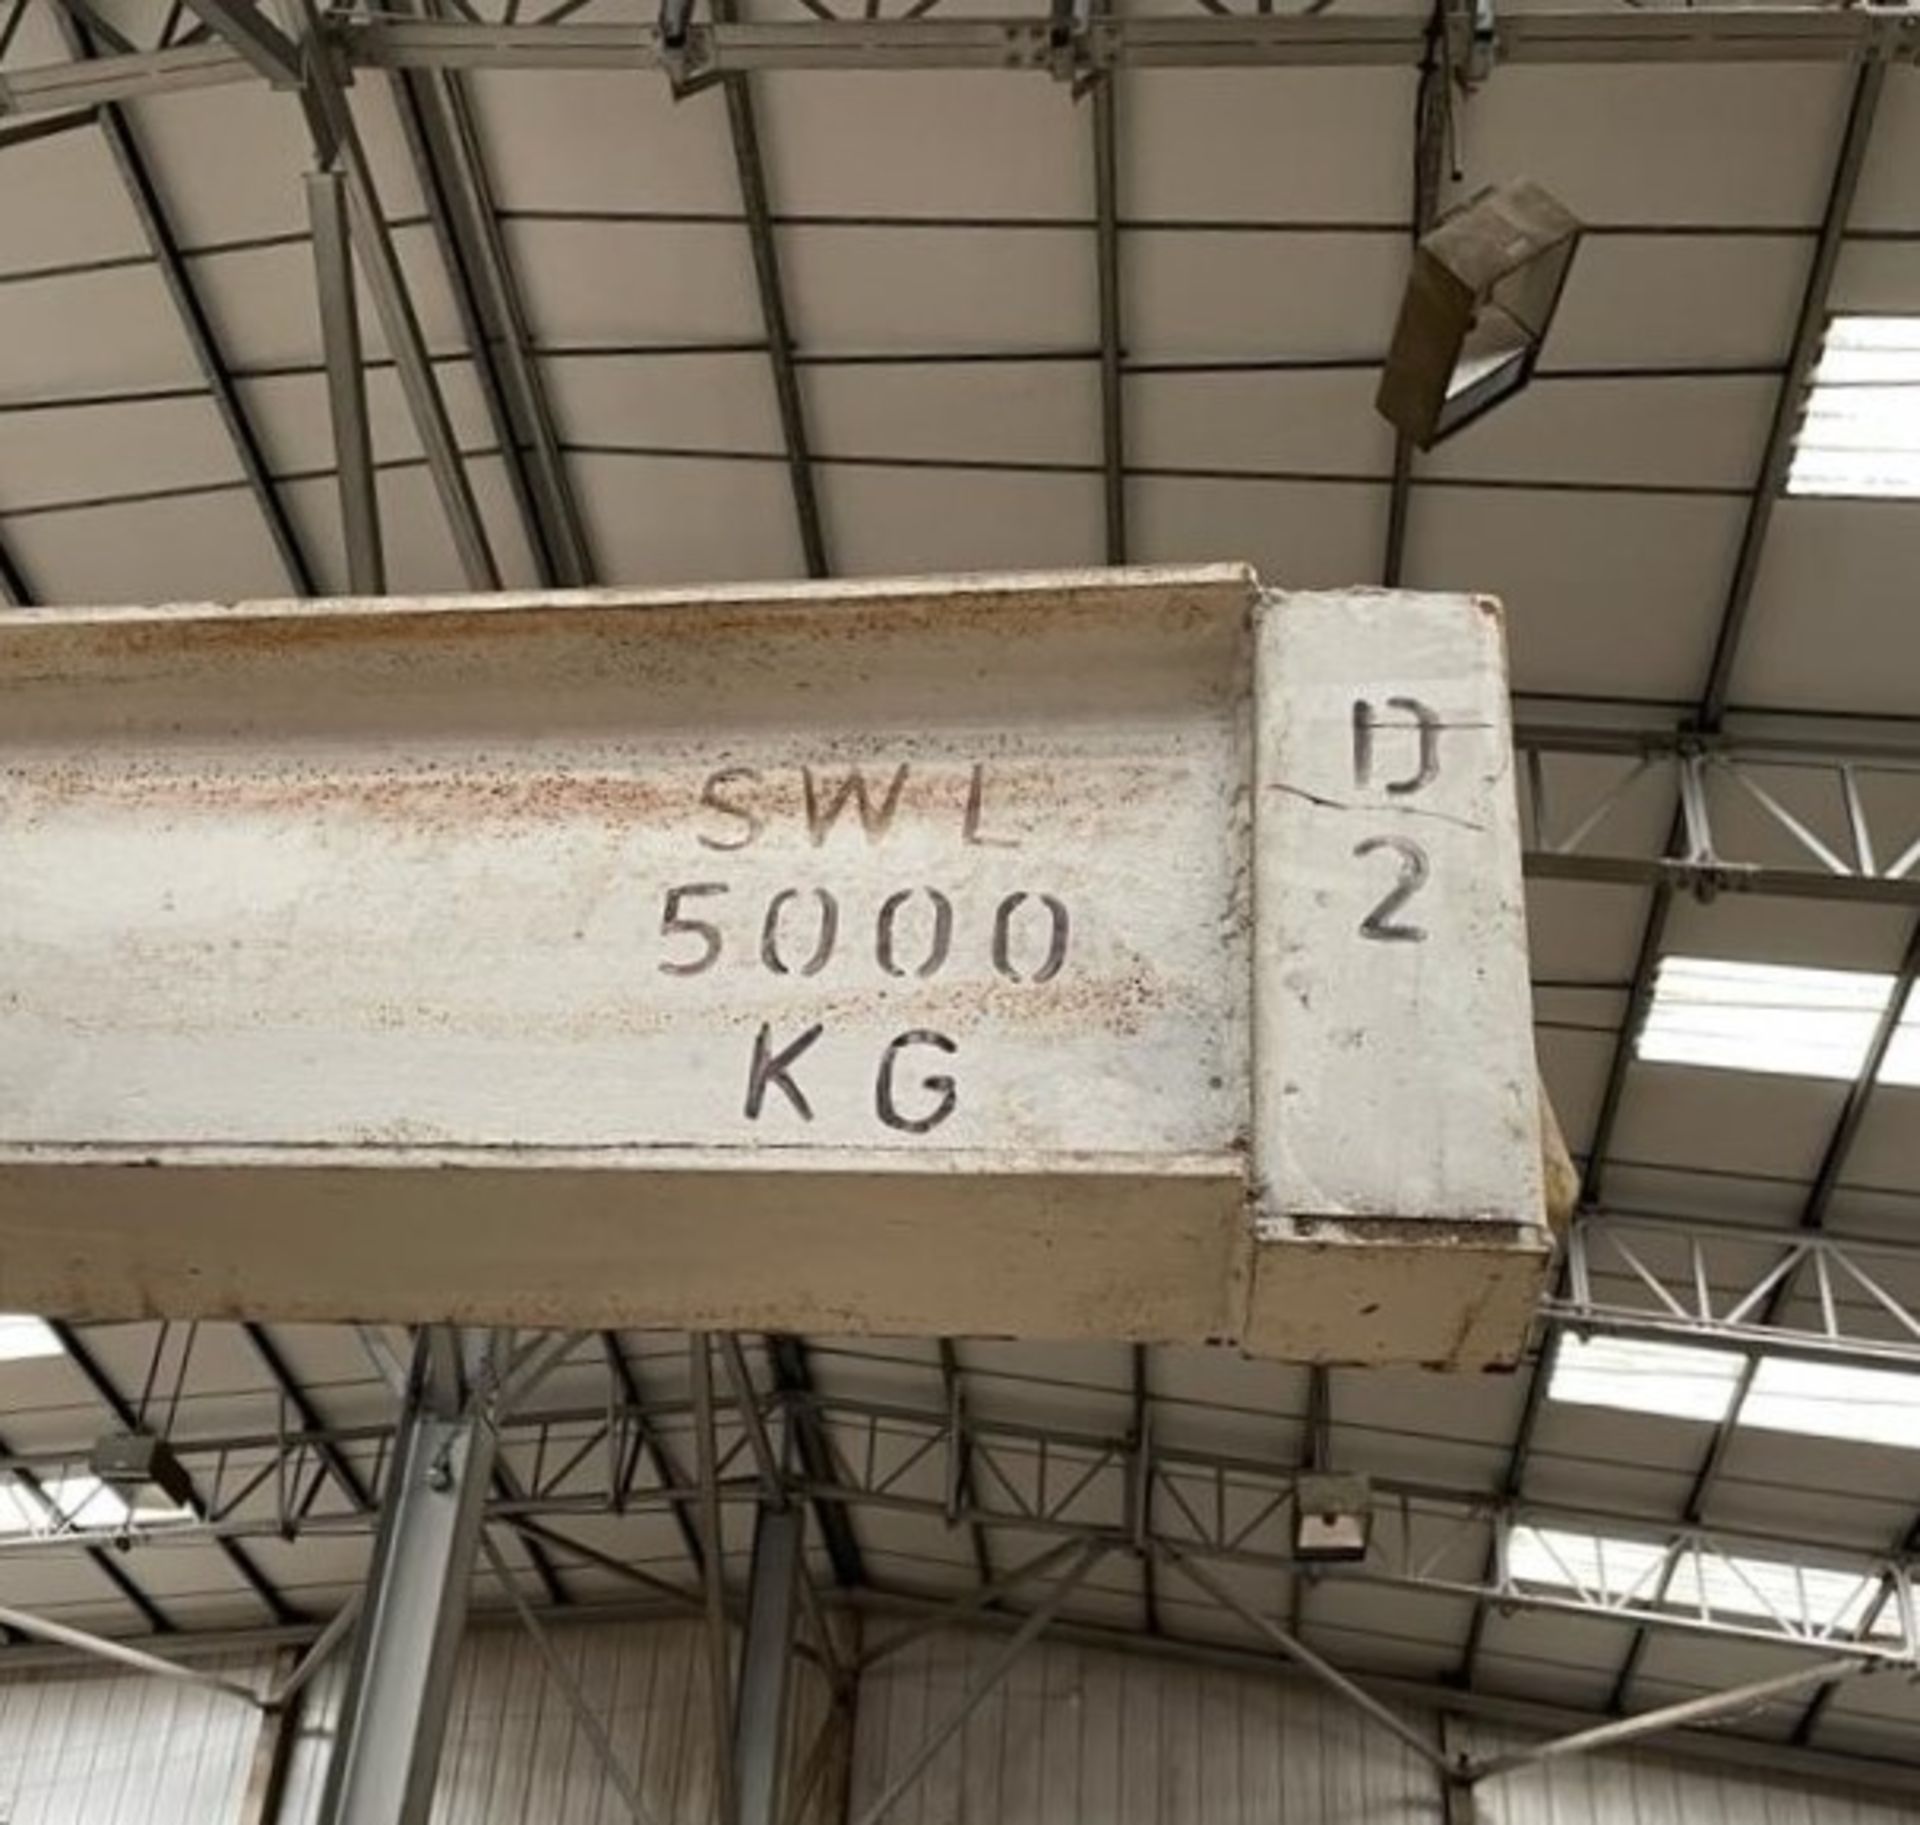 6 x Heavy Duty Cantilever Racking Uprights - SWL 5000kg - Ideal For Builders Merchants or Warehouses - Image 4 of 8